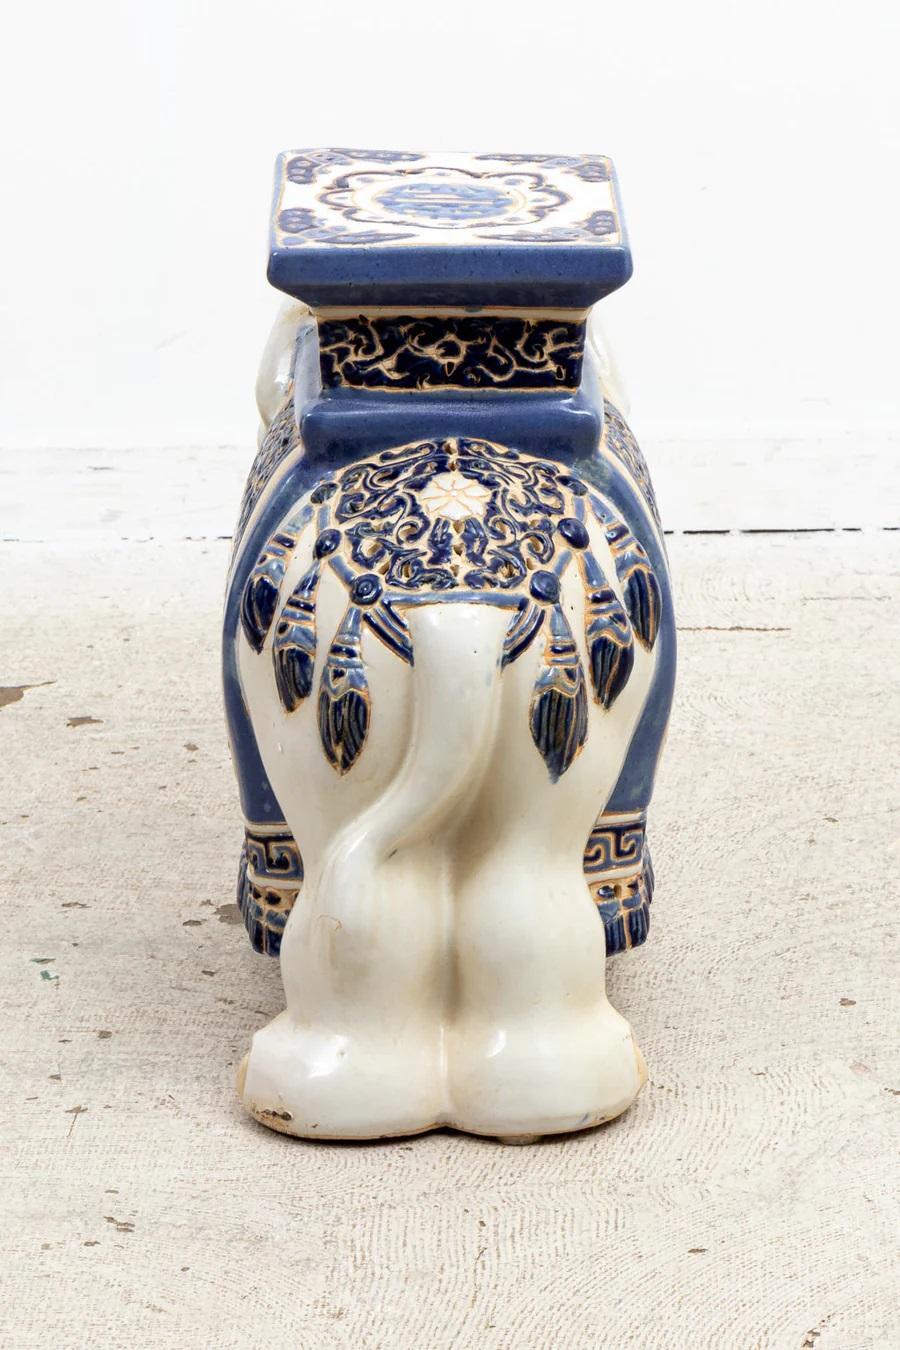 Ceramic Elephant Garden Stool, in good overall condition.